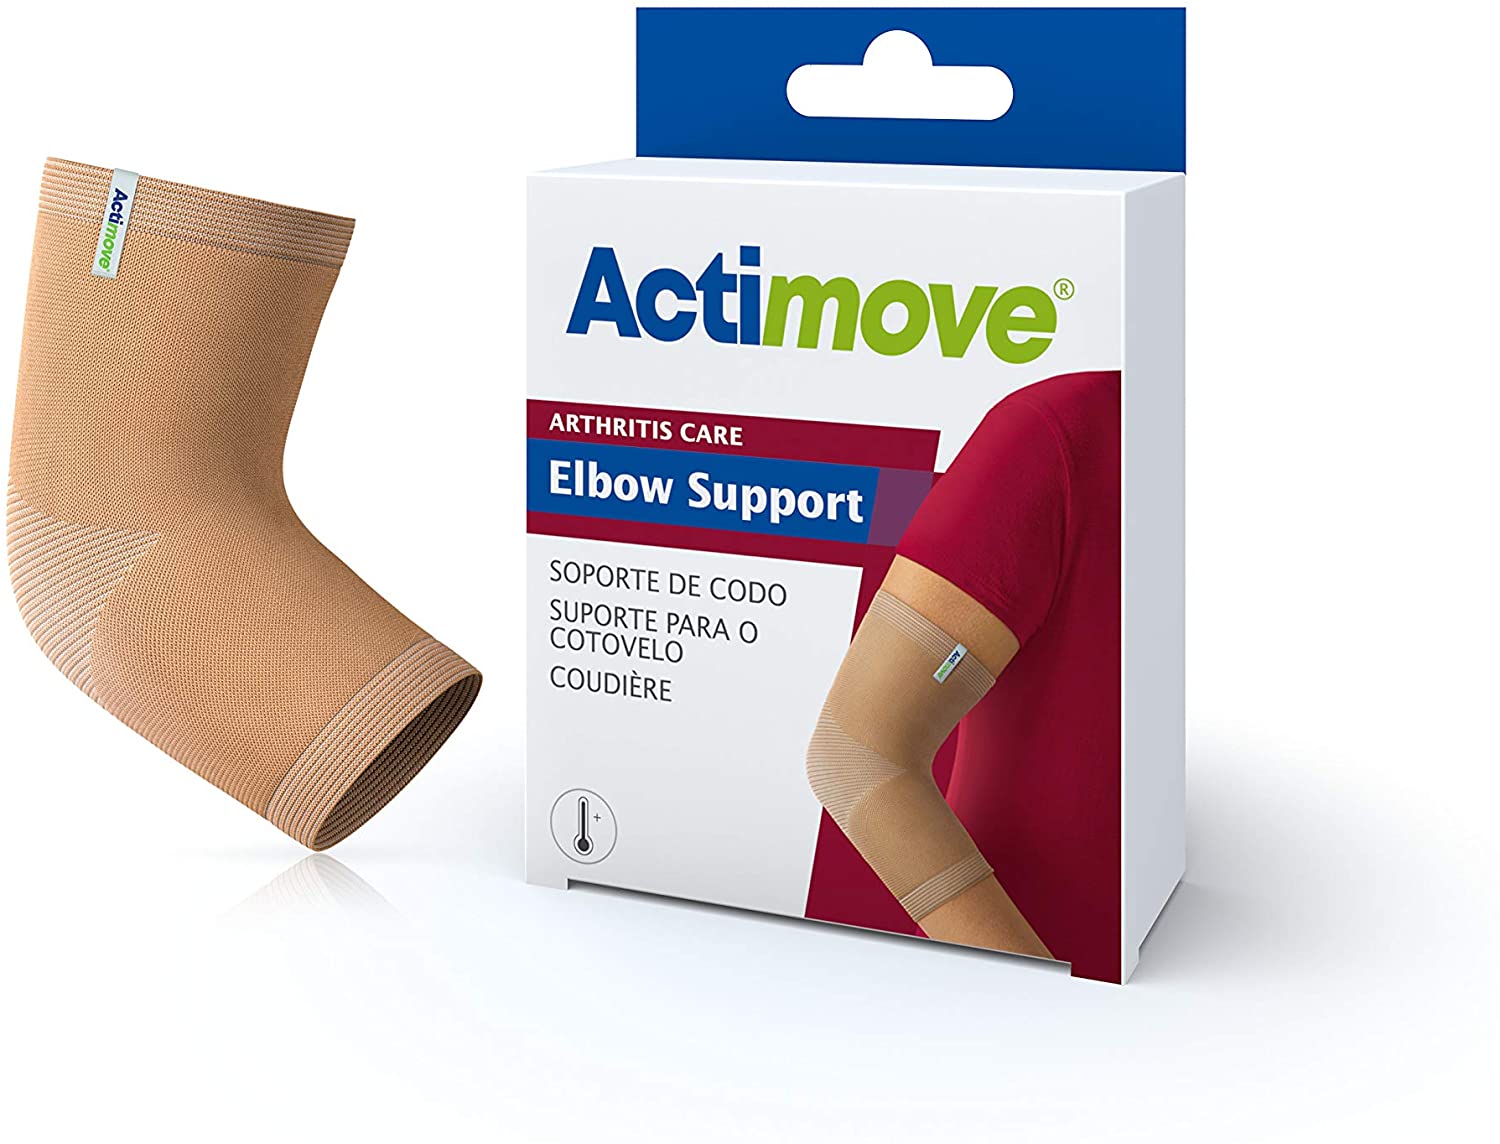 Provides firm support to relieve pain of sprains and strains, support and relief to elbow joins, muscles and tendons.